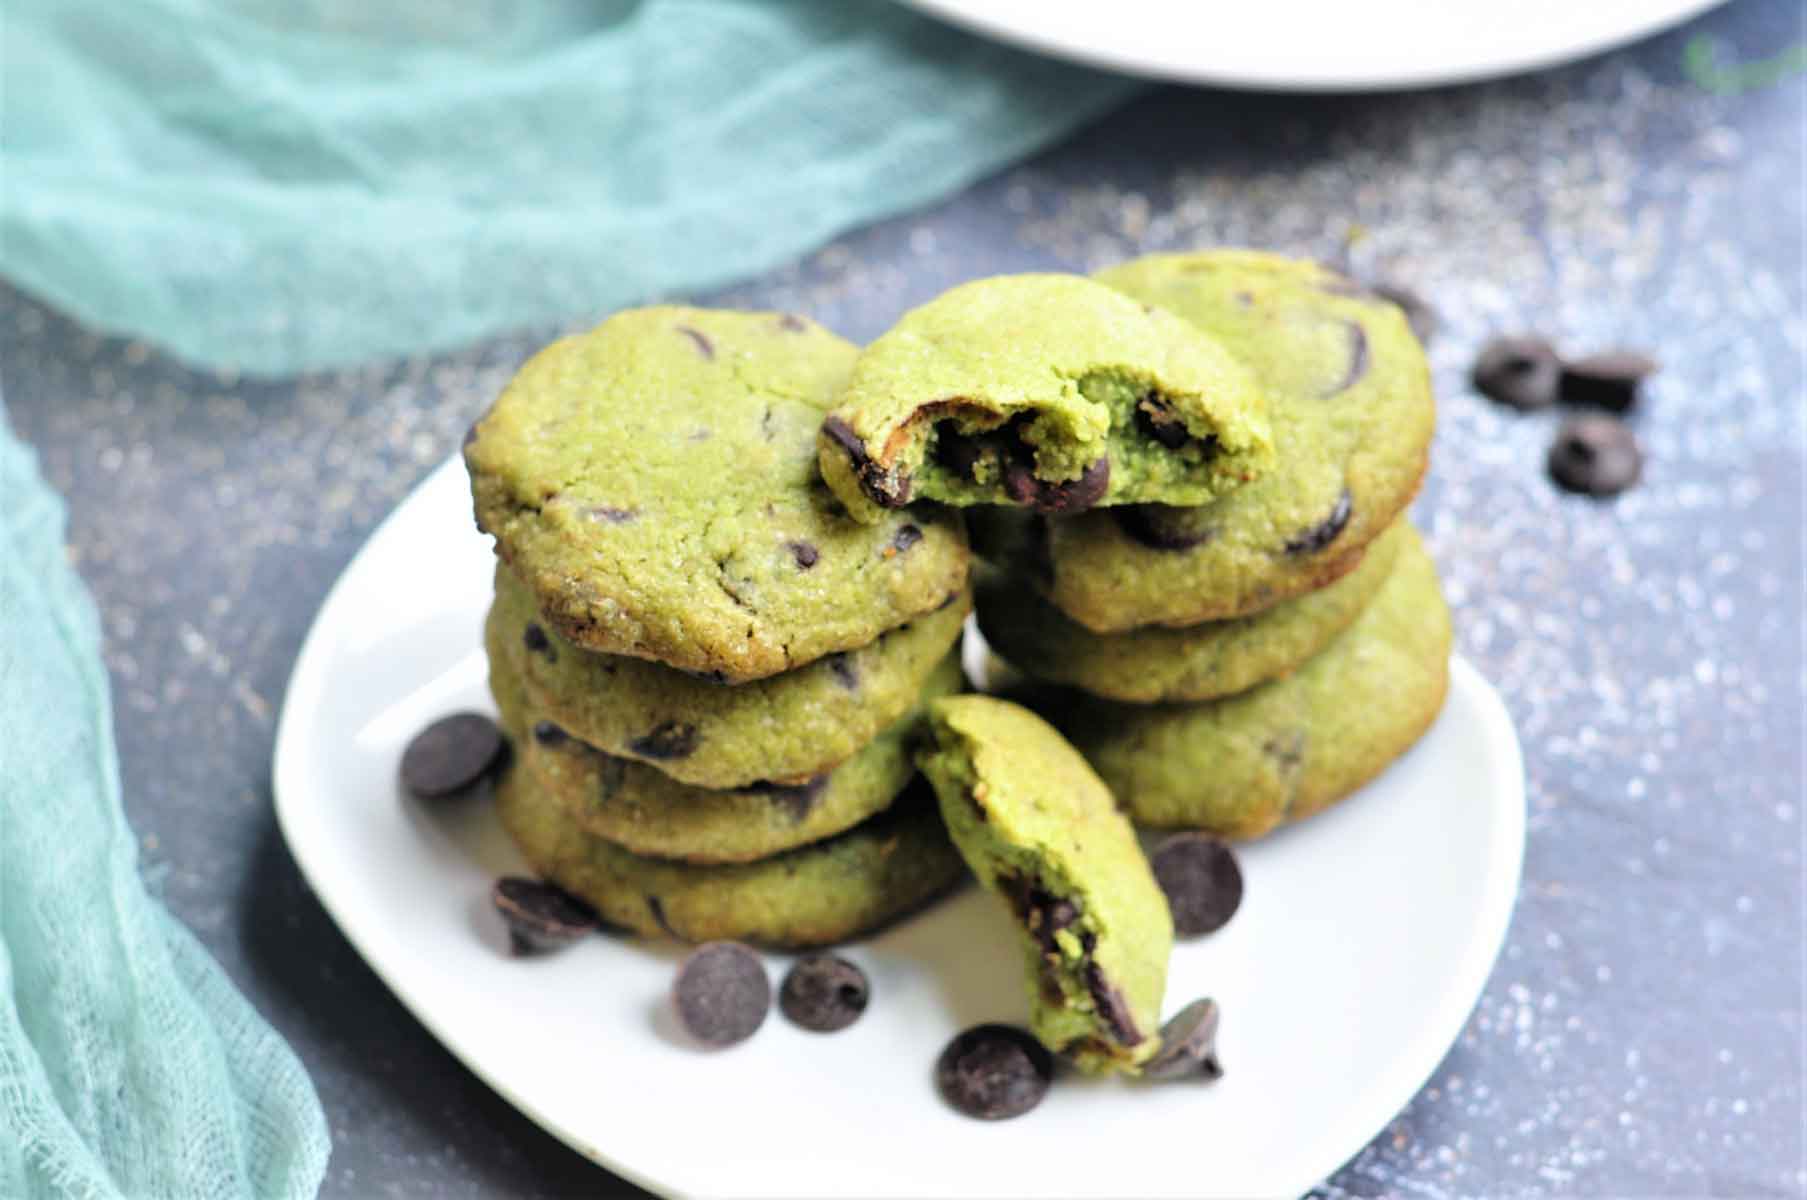 Matcha green tea cookies stacked in a plate.